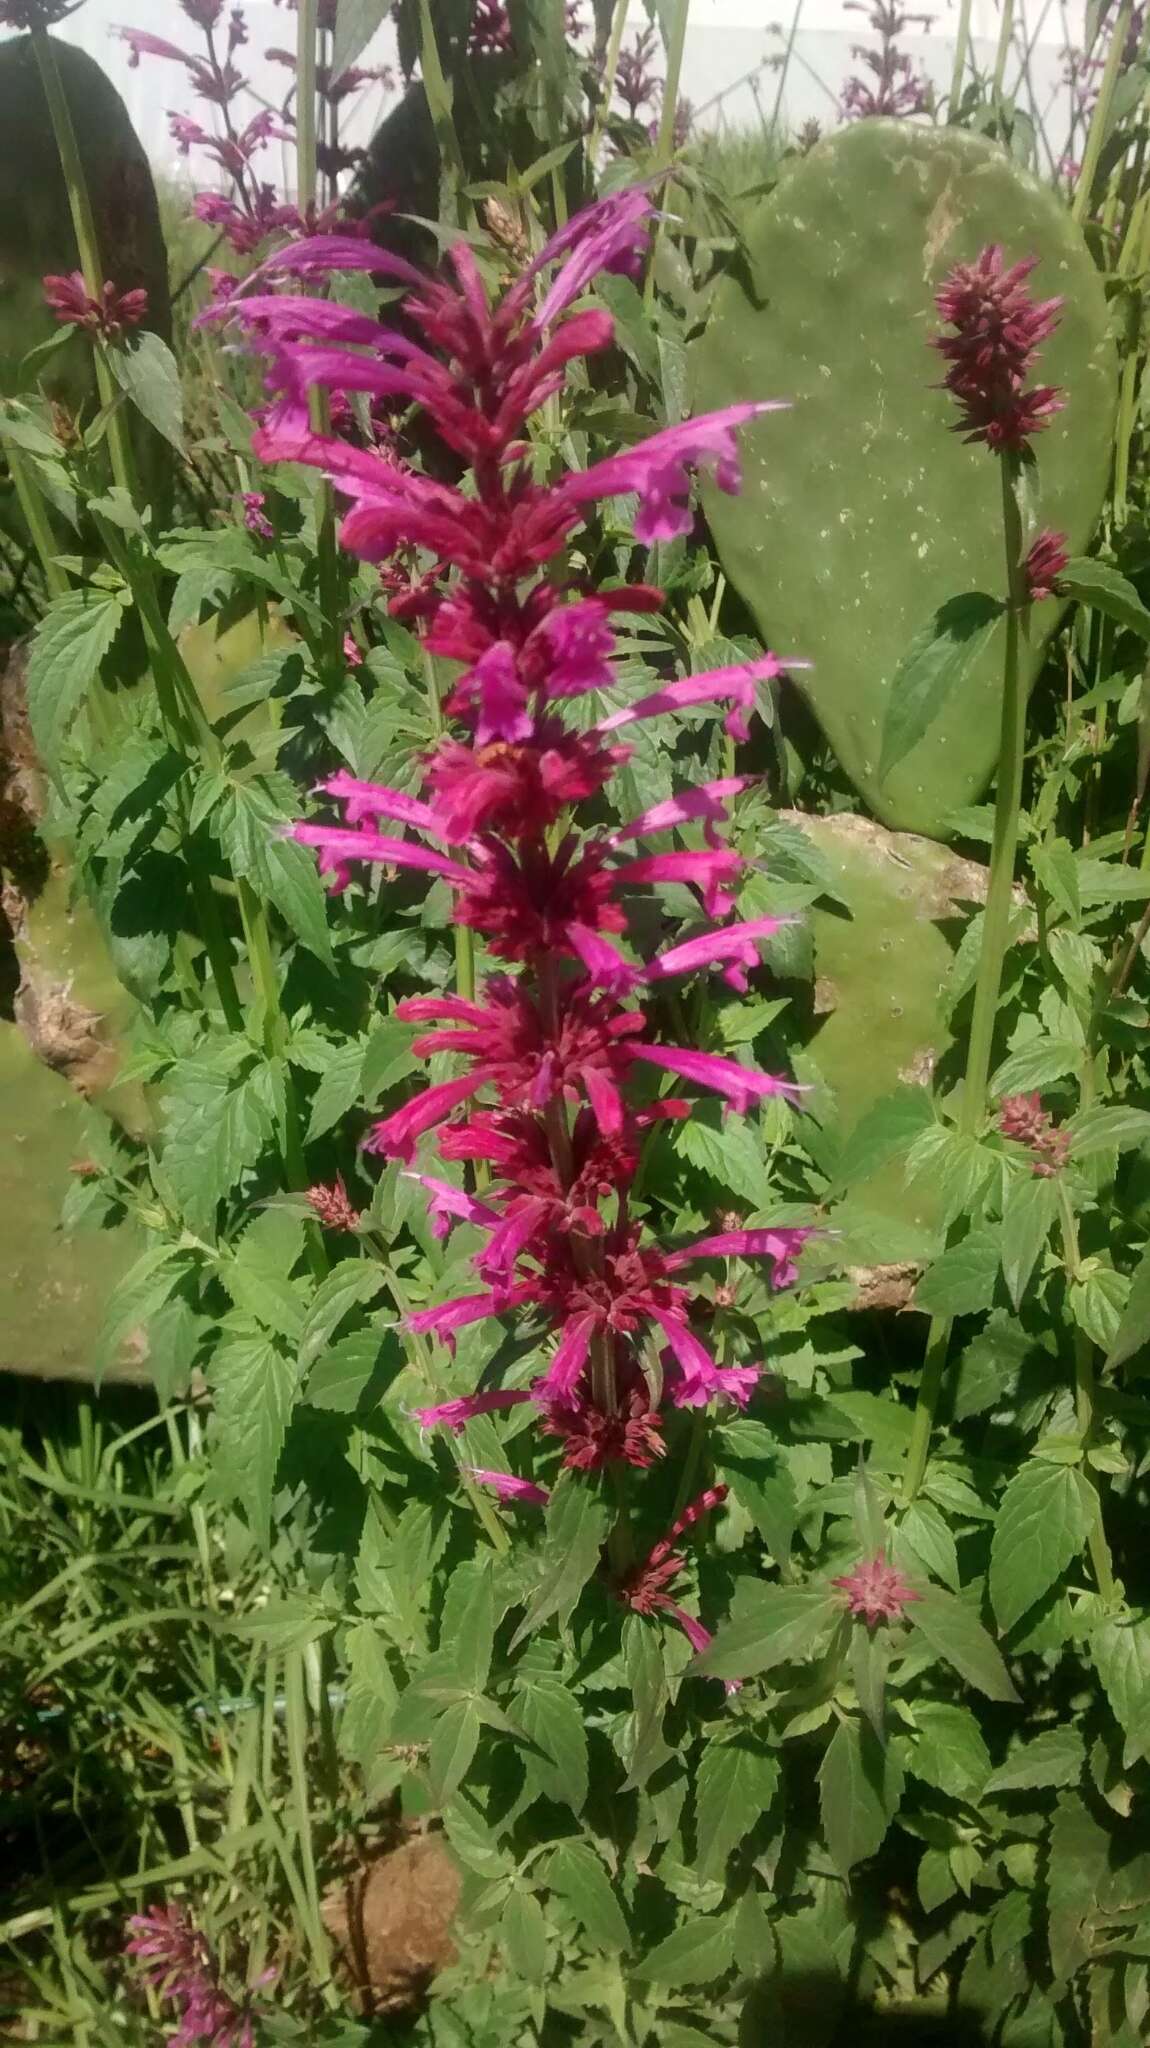 Image of Mexican giant hyssop